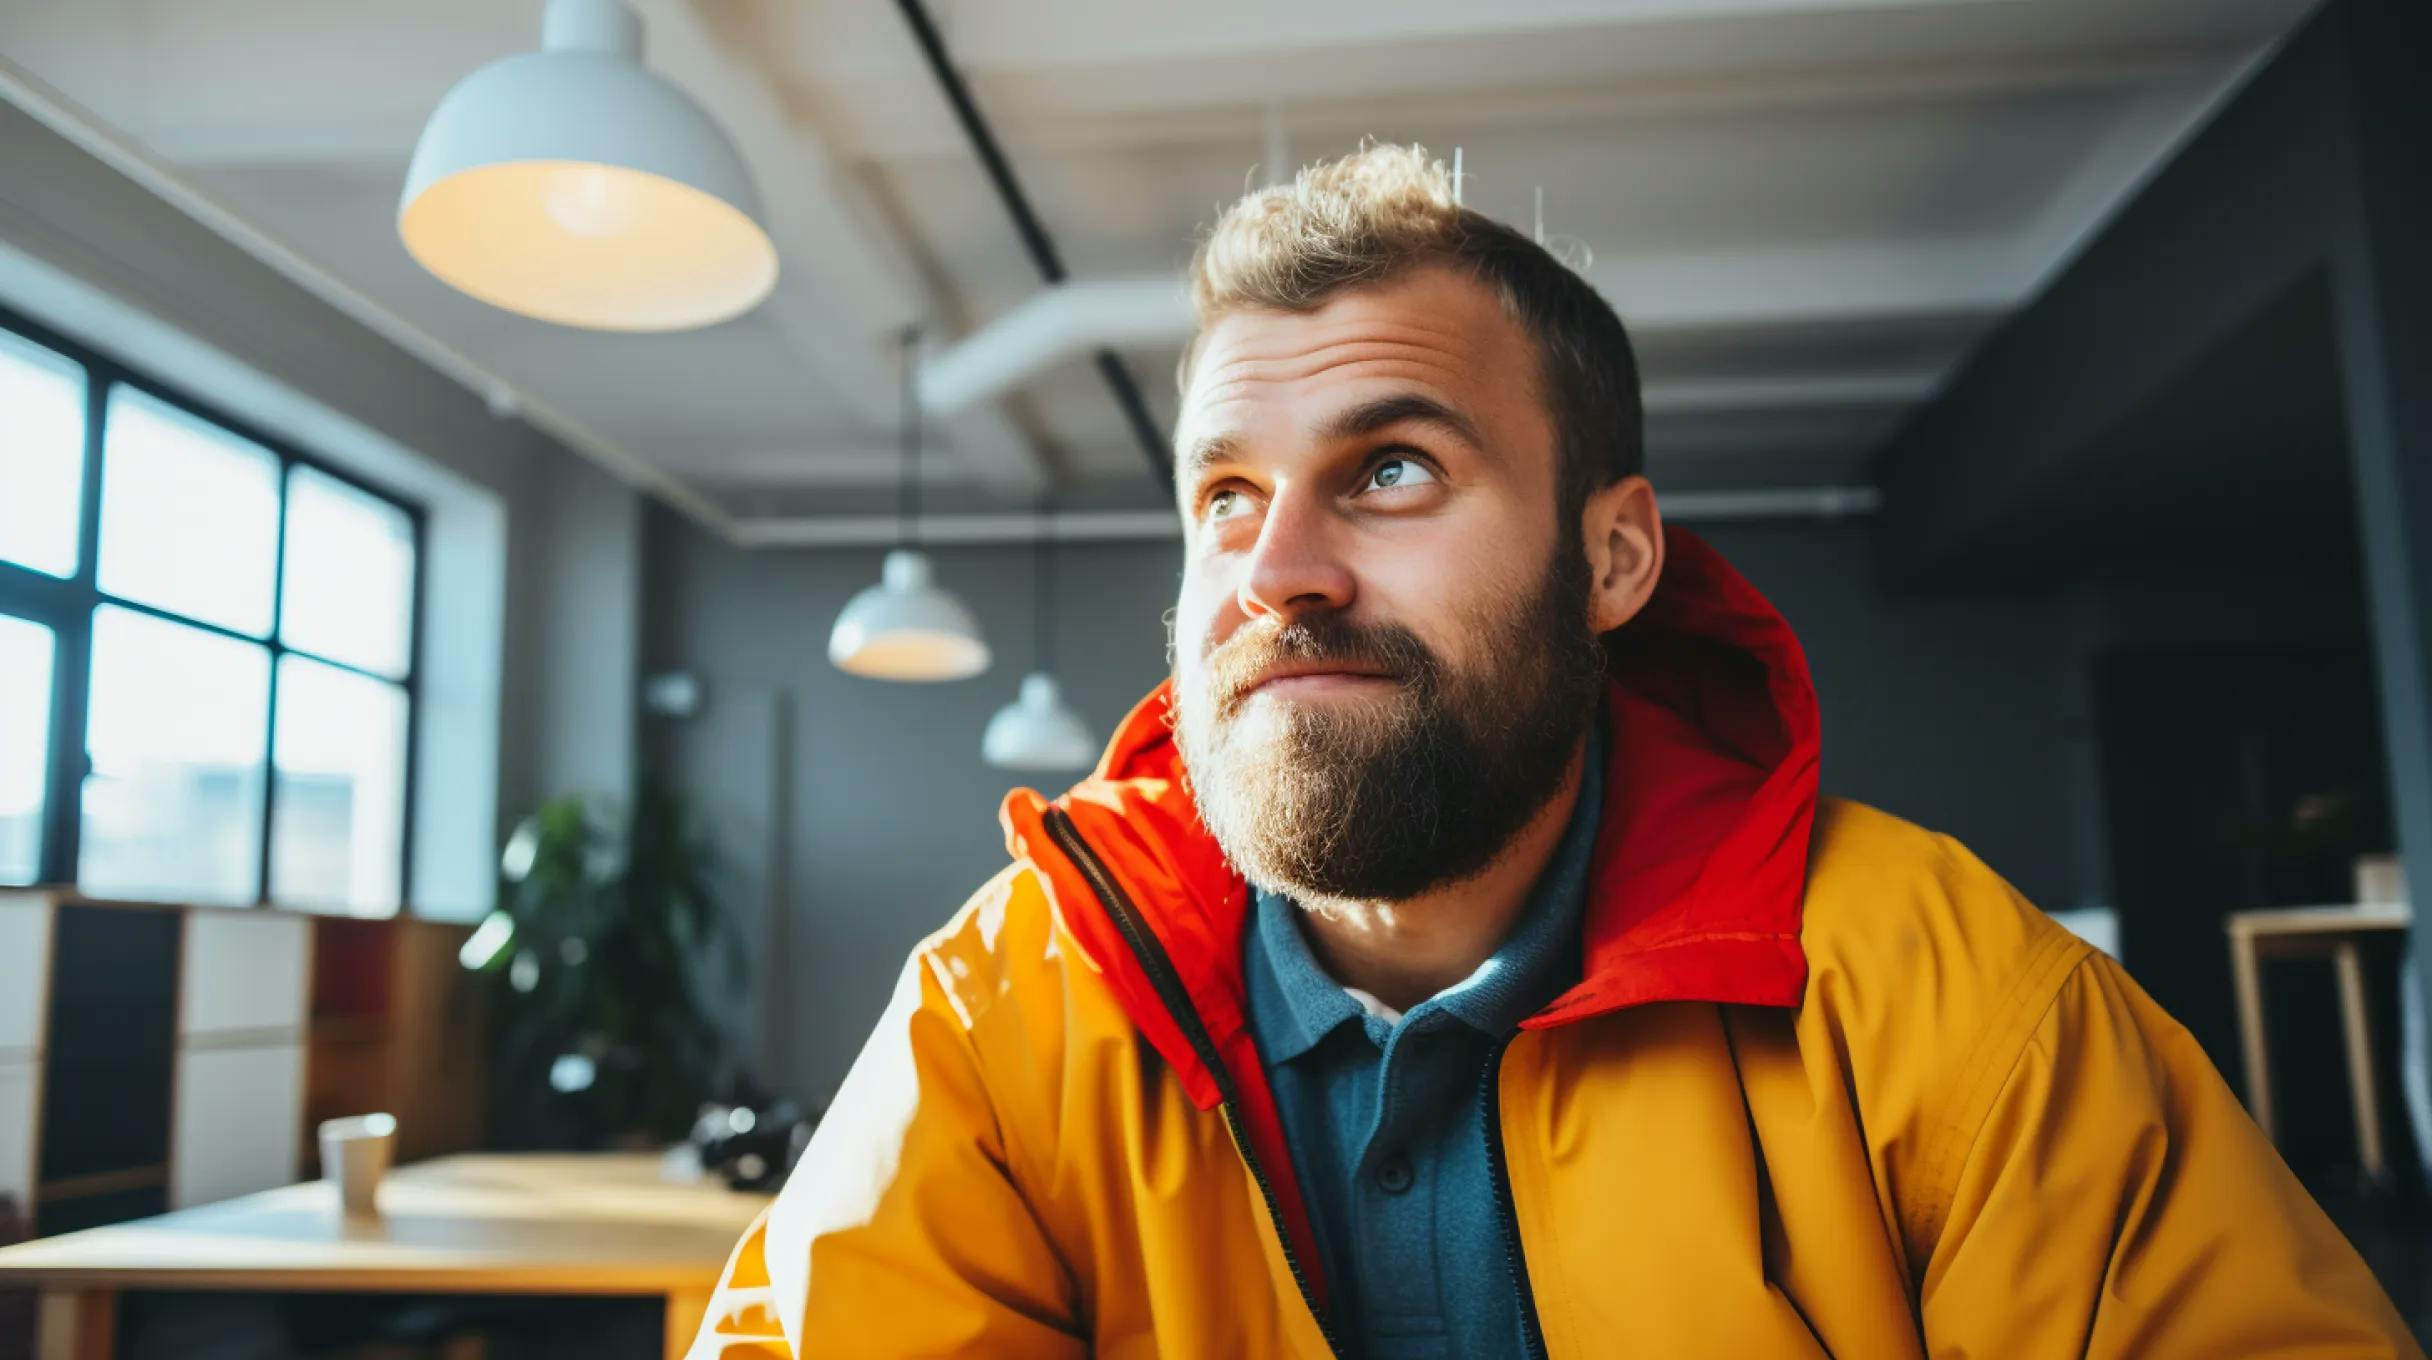 A bearded man in a yellow jacket sitting in an office, focused and engaged in his work.